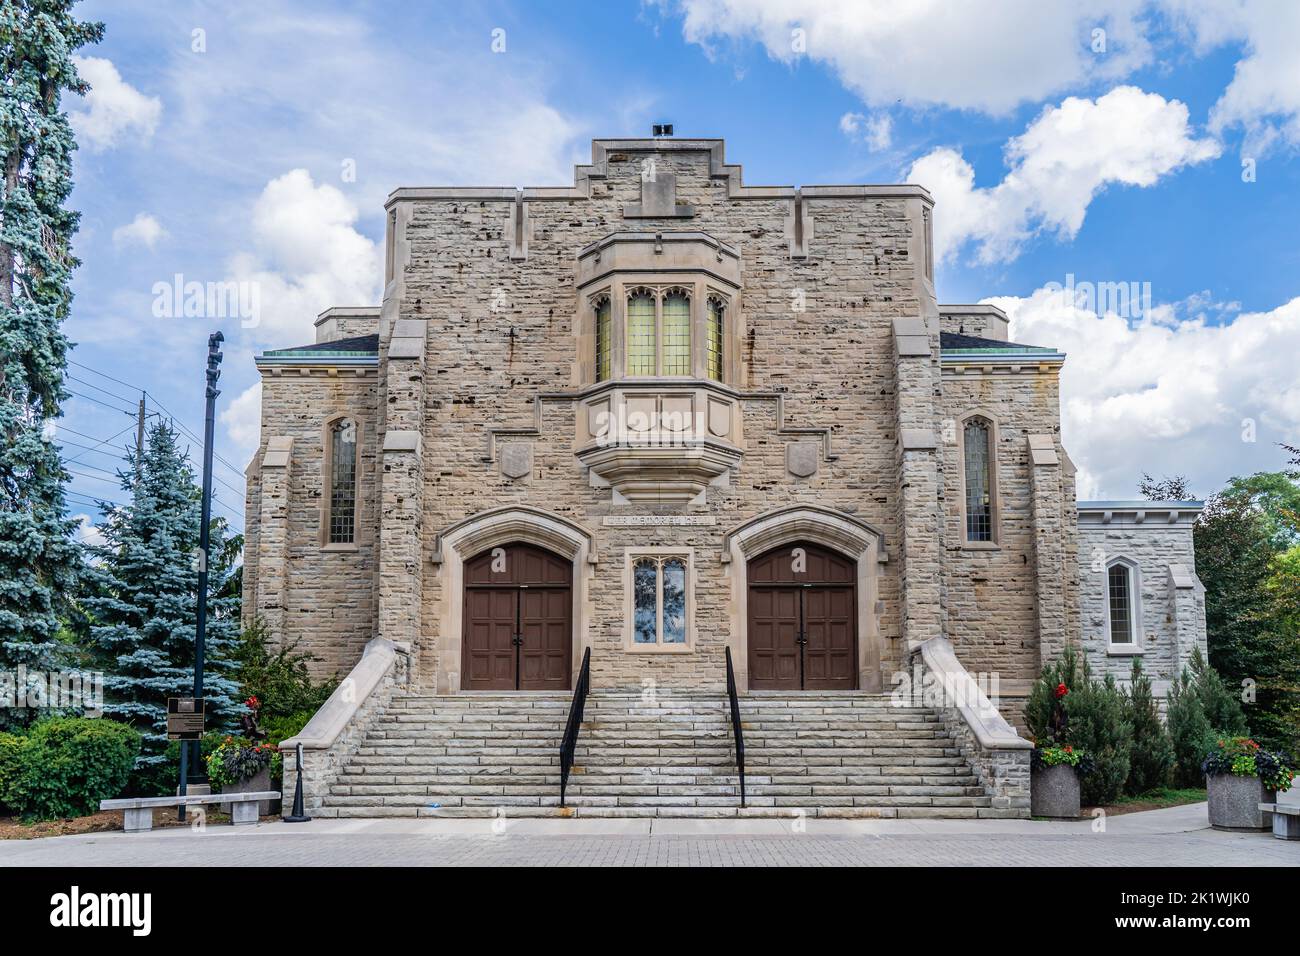 War Memorial Hall, Guelph, Ontario, Canada, built in 1924, this limestone lecture hall theatre honors students who died in World War I Stock Photo